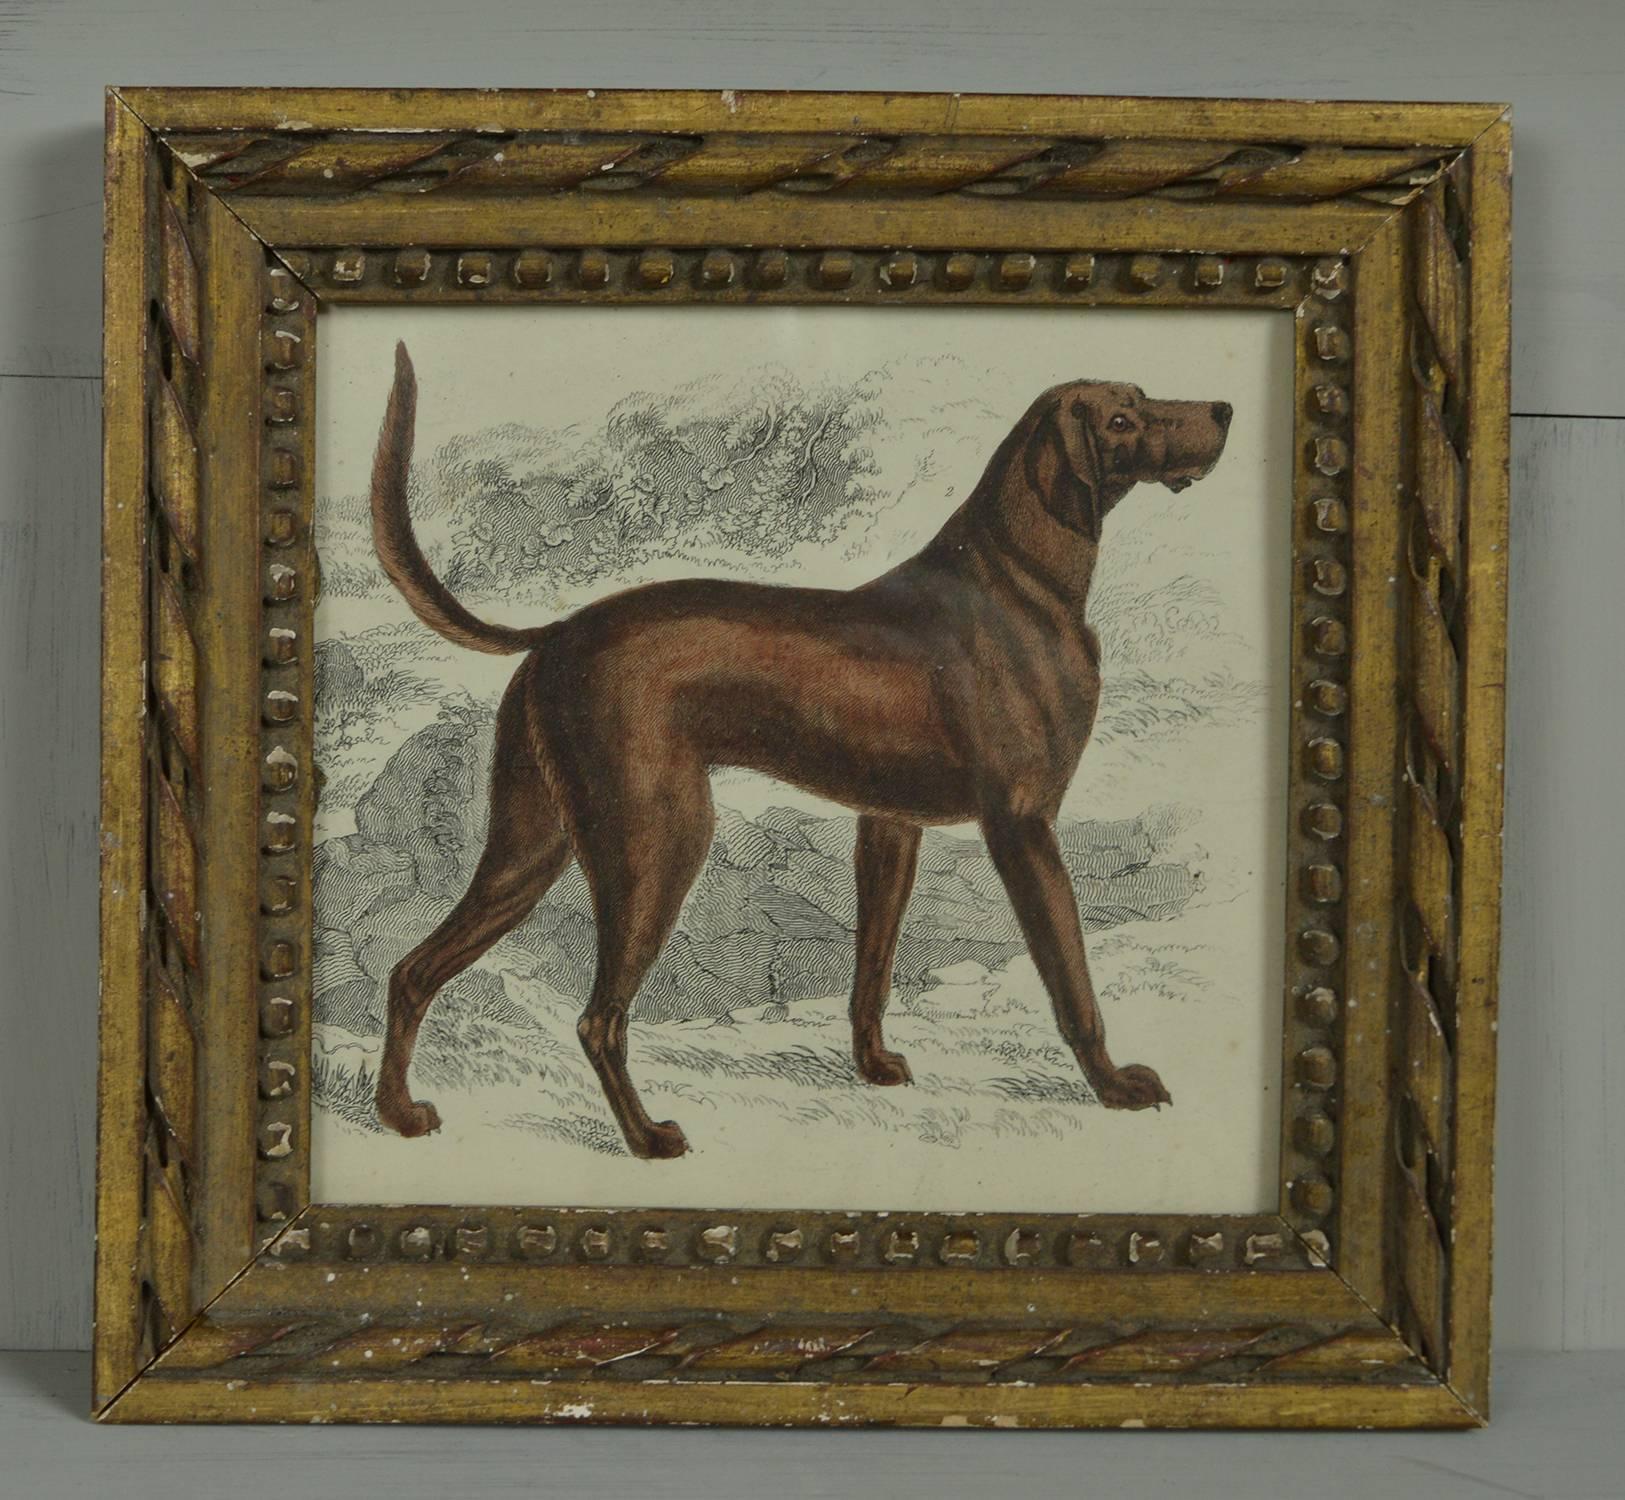 Great image of a bloodhound.

Hand colored lithograph.

Original color.

From Goldsmith's animated nature.

Published by Fullarton, London and Edinburgh, 1847.

Presented in a distressed antique gilt frame.



 